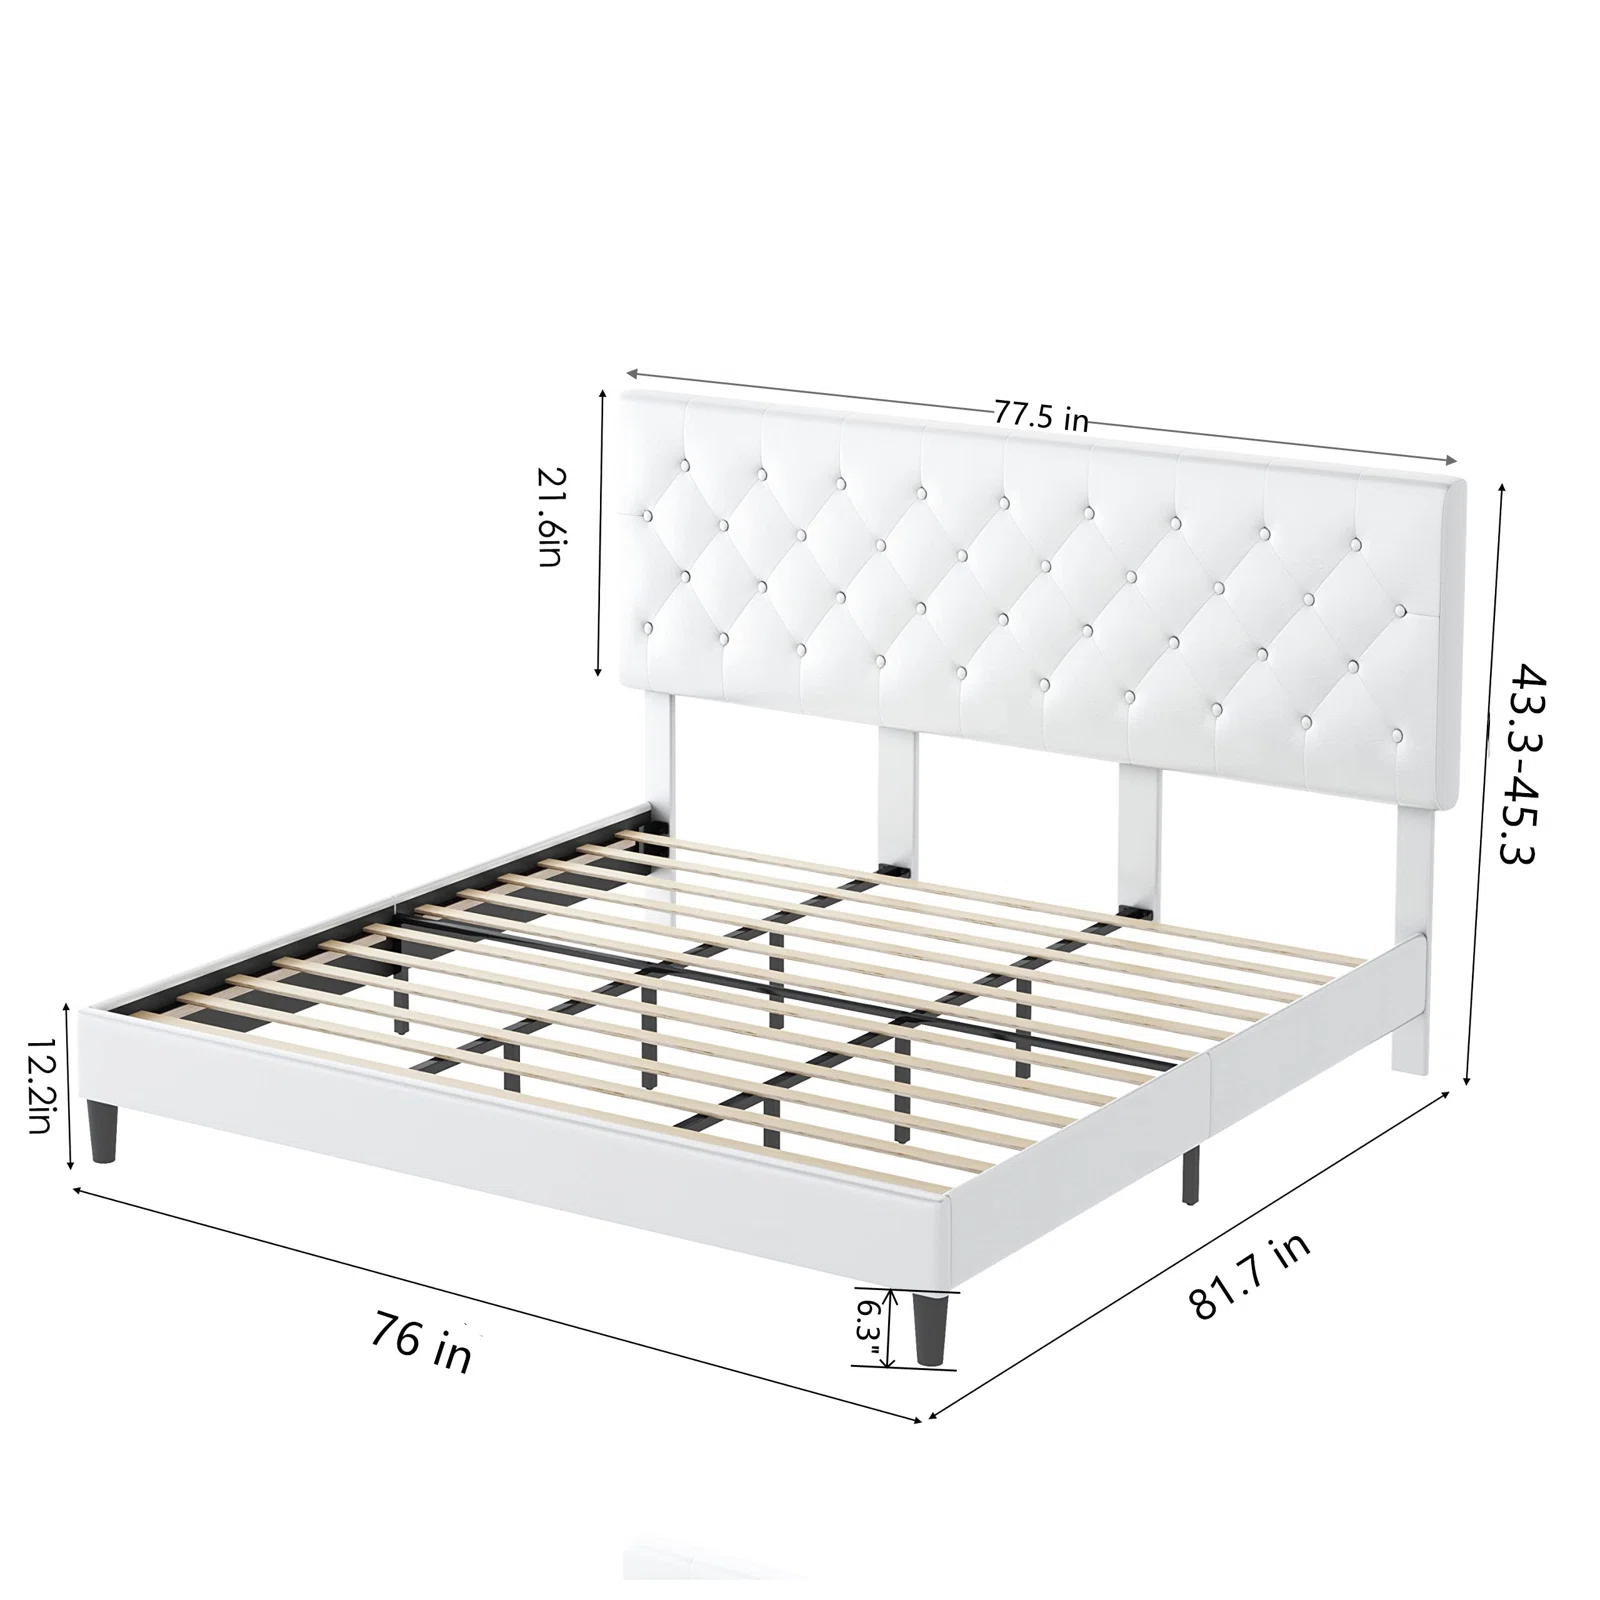 Homfa King Bed Frame, White Faux Leather Upholstered Button Tufted Low Profile Platform Bed Frame with Adjustable Headboard for Bedroom - image 2 of 8